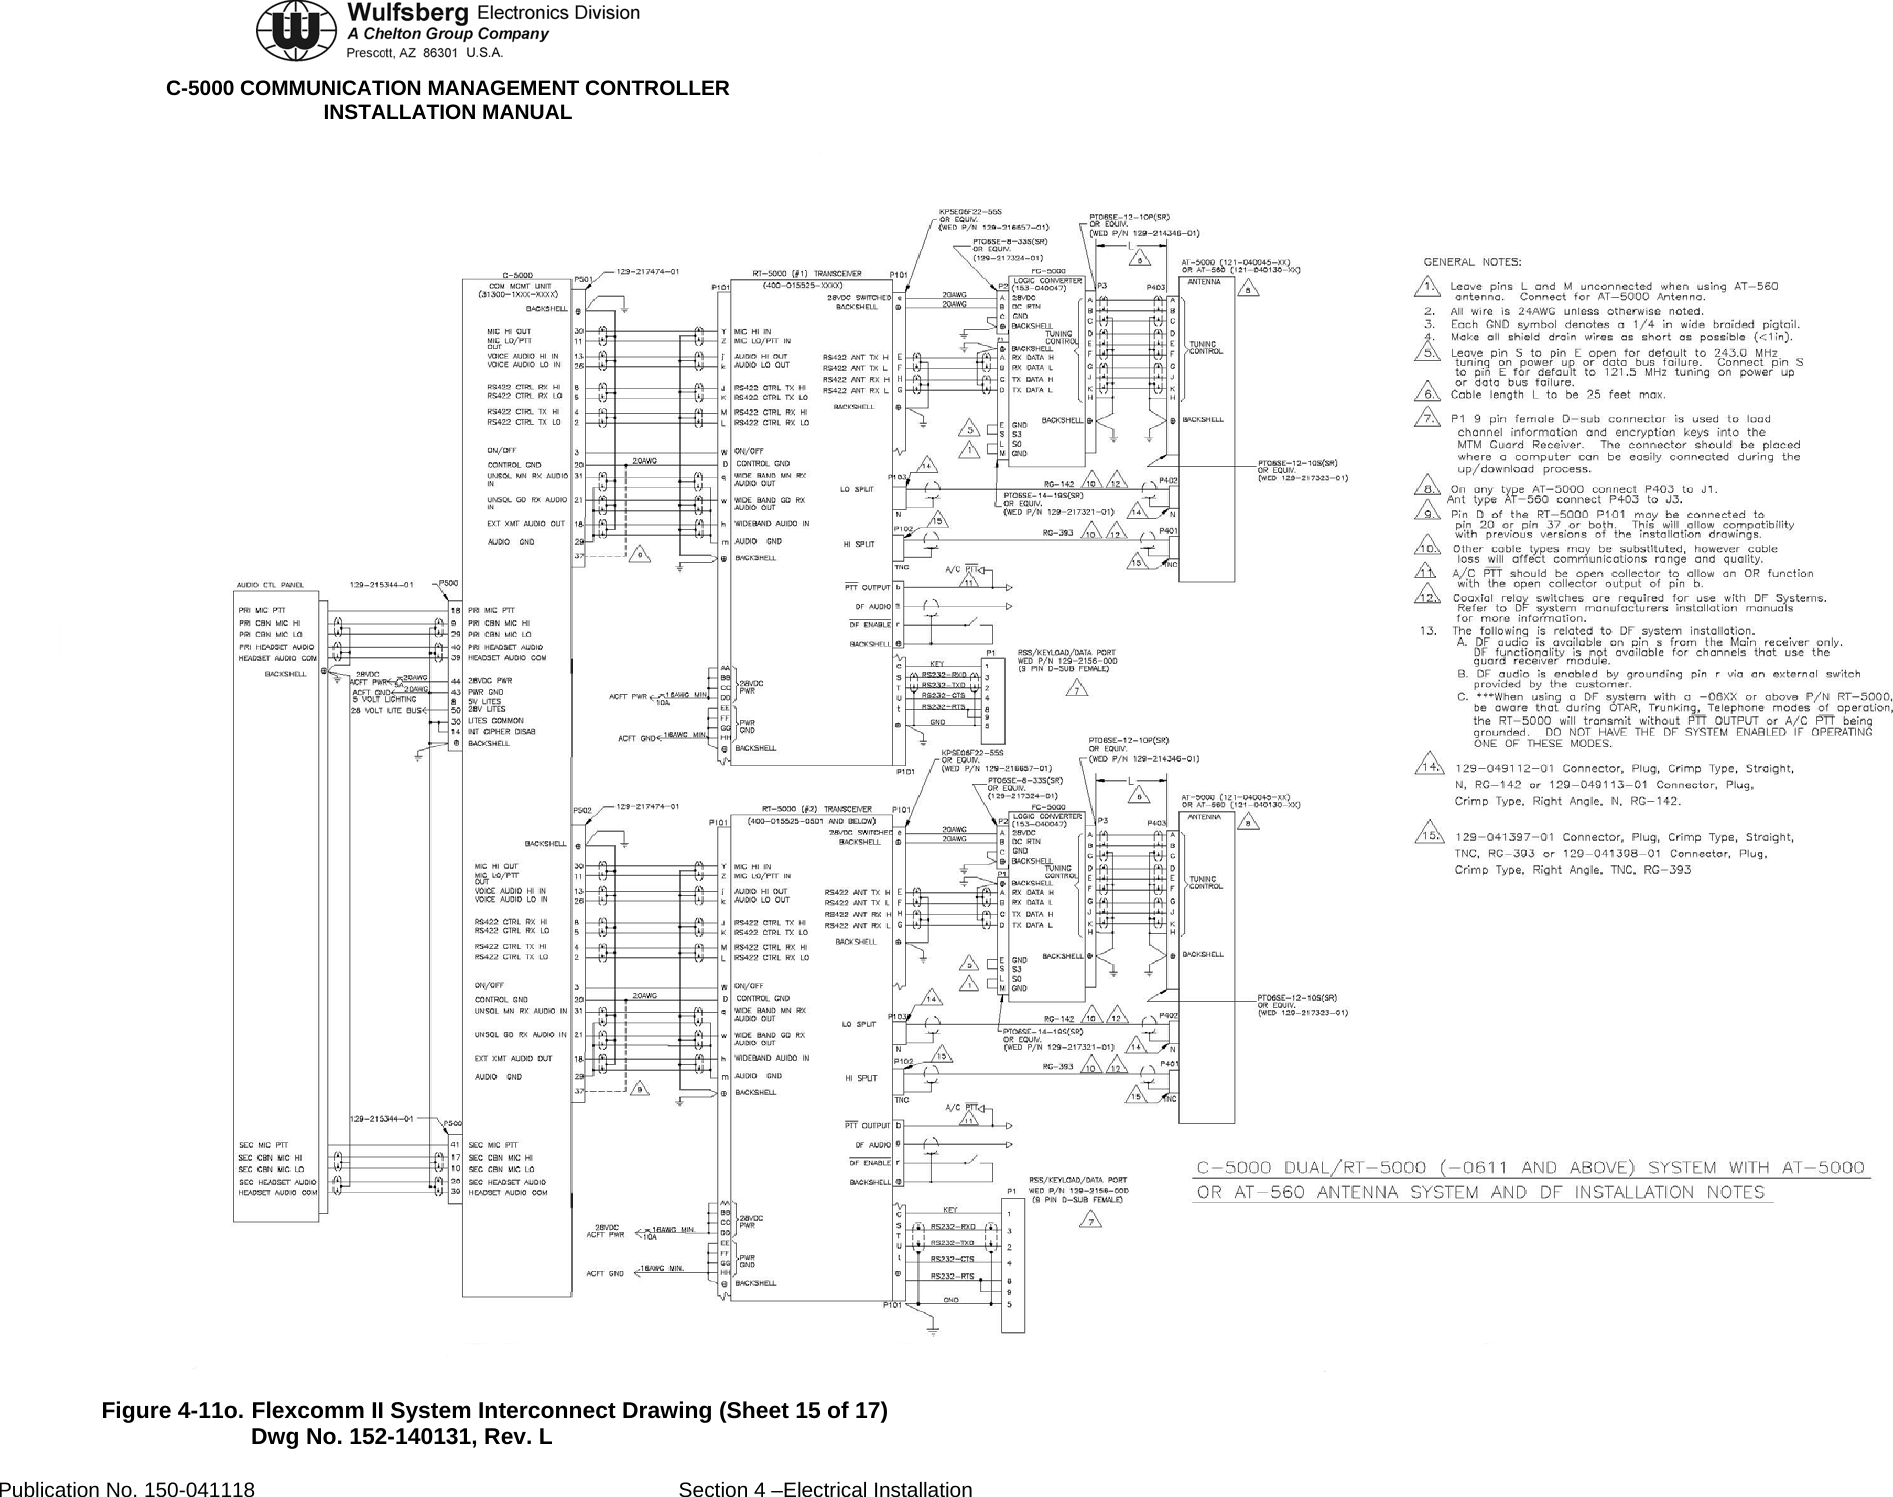  C-5000 COMMUNICATION MANAGEMENT CONTROLLER INSTALLATION MANUAL  Figure 4-11o. Flexcomm II System Interconnect Drawing (Sheet 15 of 17) Dwg No. 152-140131, Rev. L Publication No. 150-041118  Section 4 –Electrical Installation 